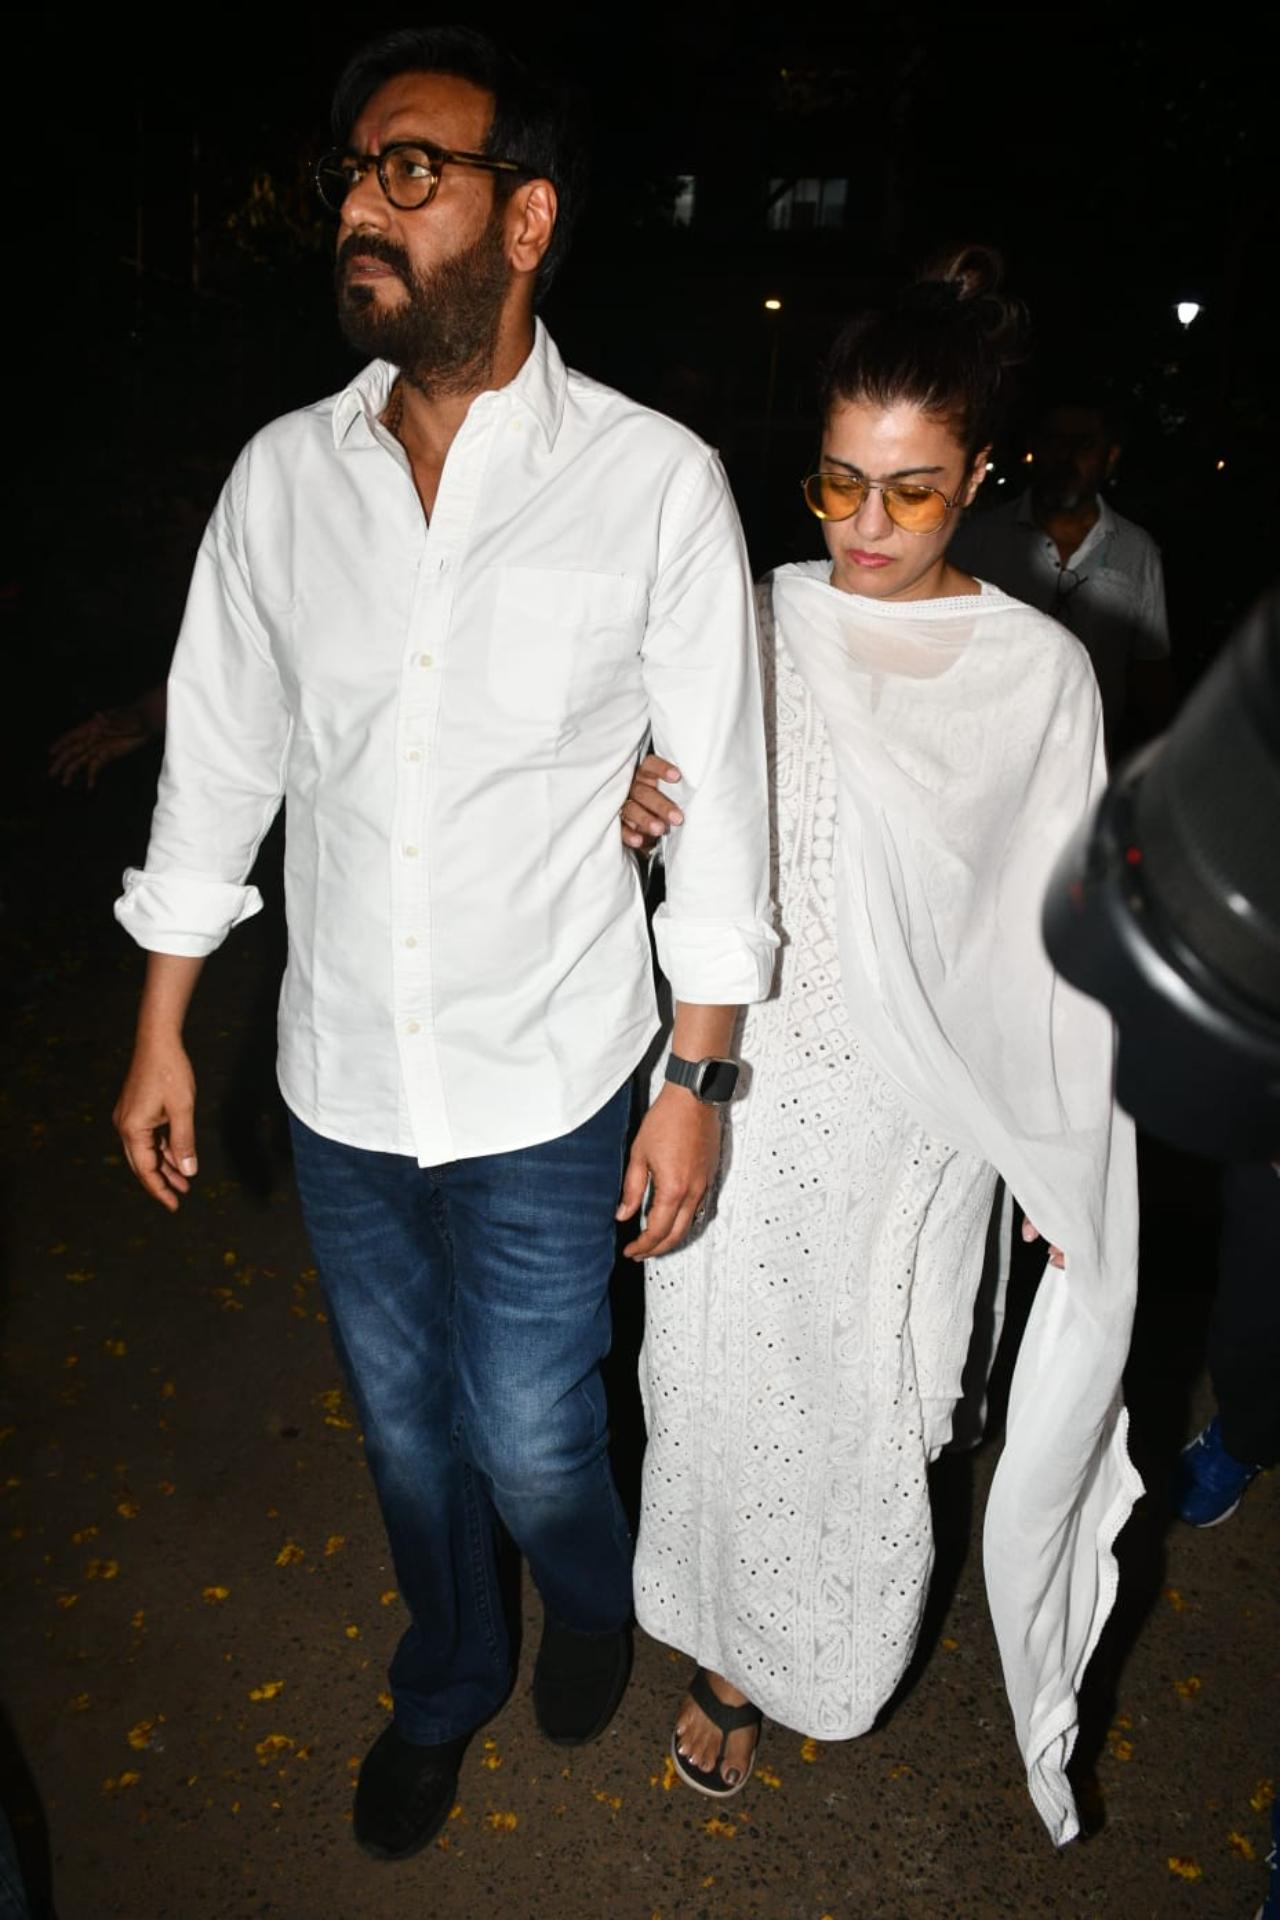 Ajay Devgn and Kajol arrived at the Chopra house. Kajol was also seen at the Chopra house on Thursday evening